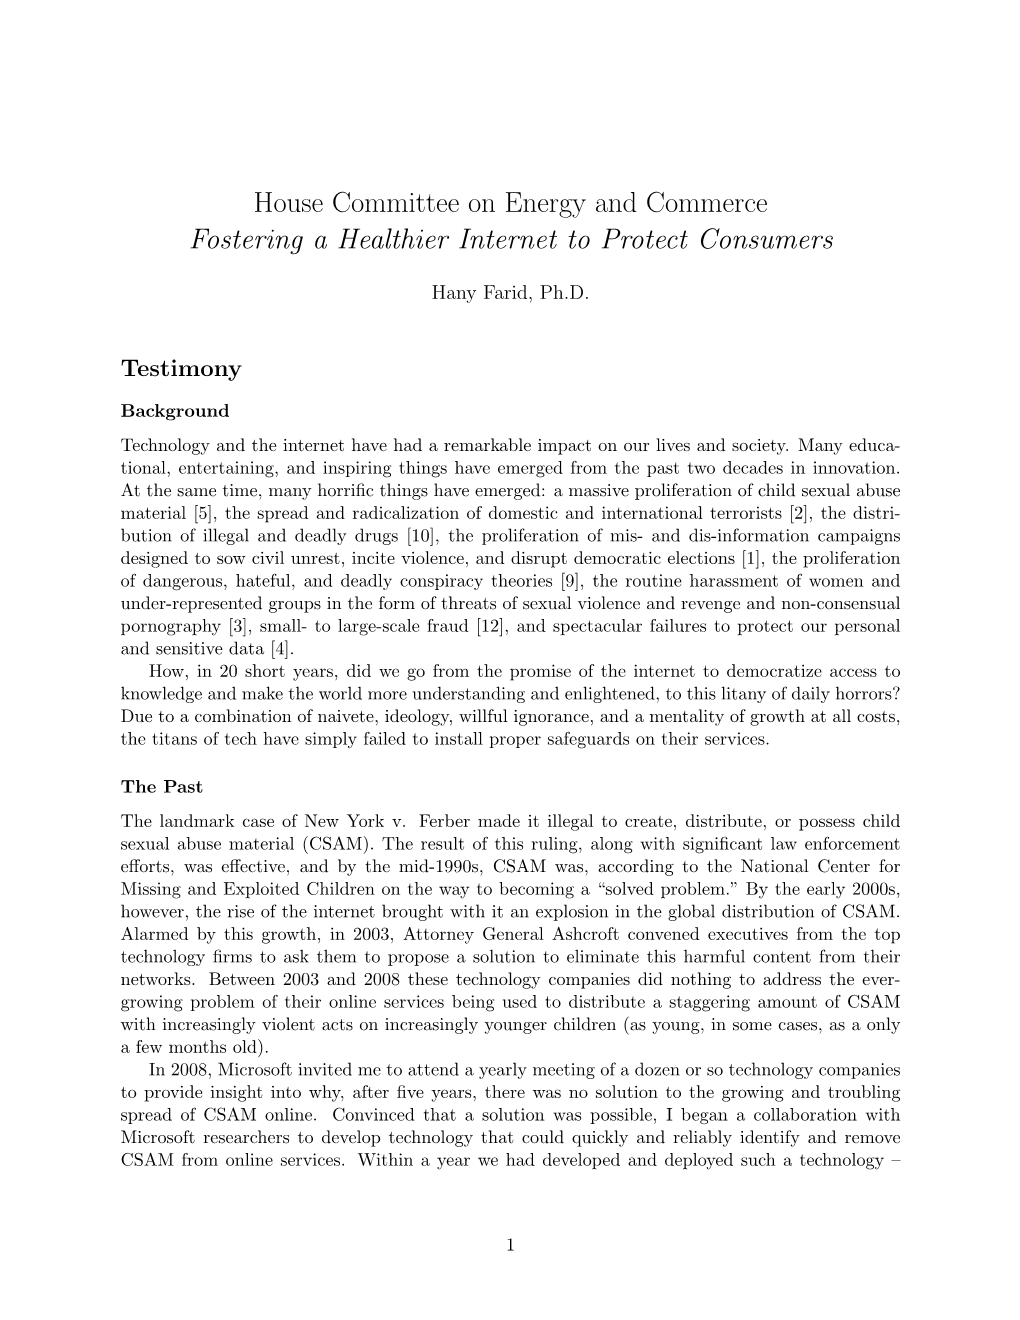 House Committee on Energy and Commerce Fostering a Healthier Internet to Protect Consumers